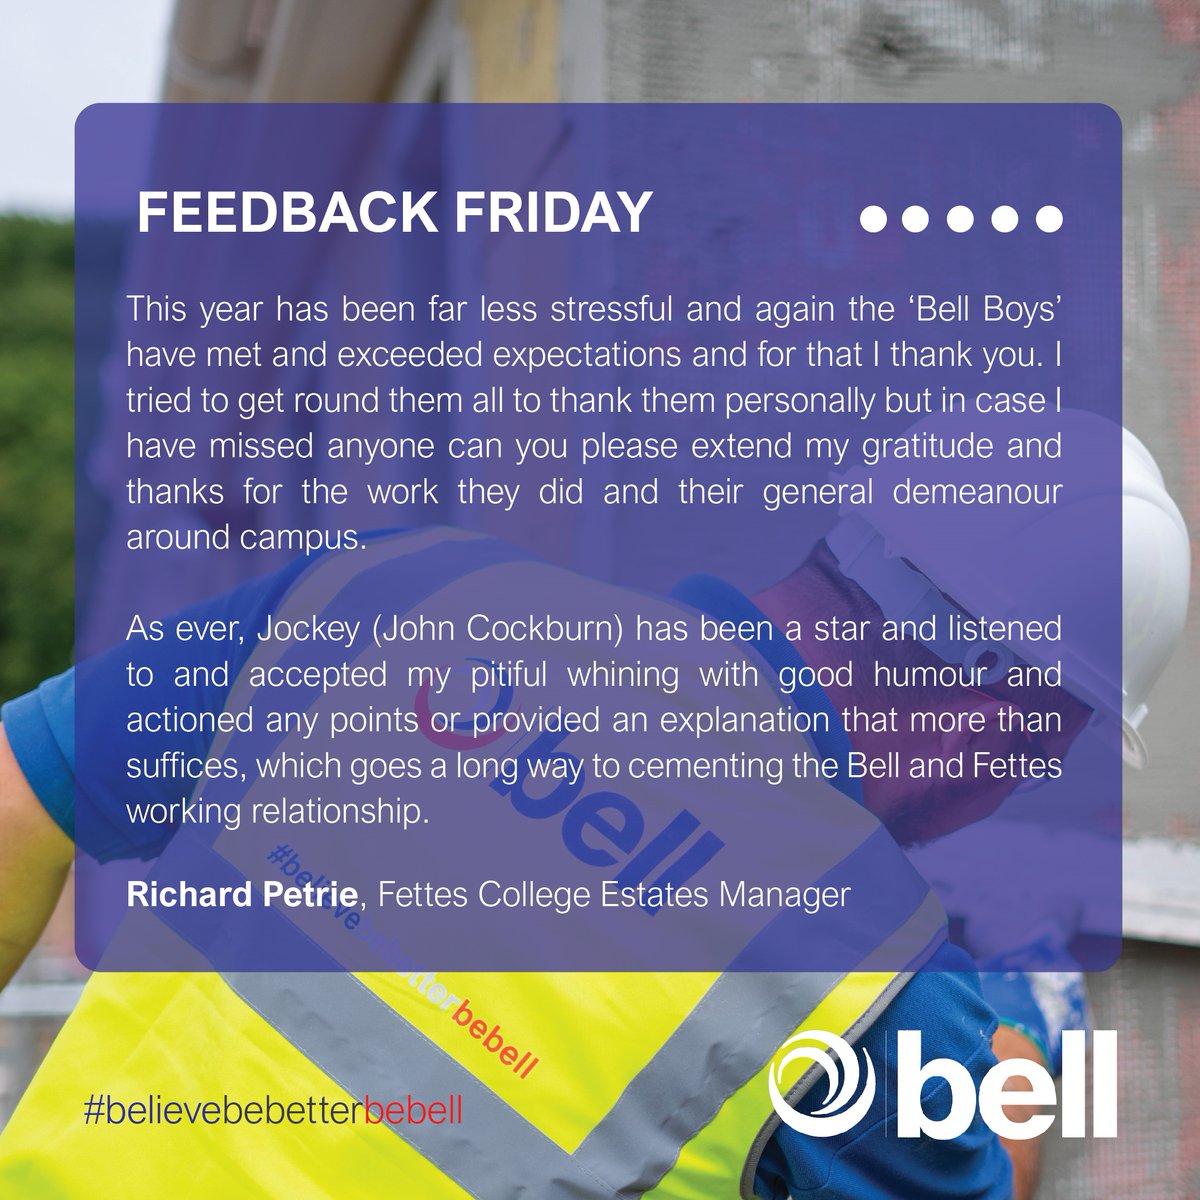 It's Friday, time to celebrate a good job done with some #feedbackfriday - great work from our Edinburgh team 👏 #bebell